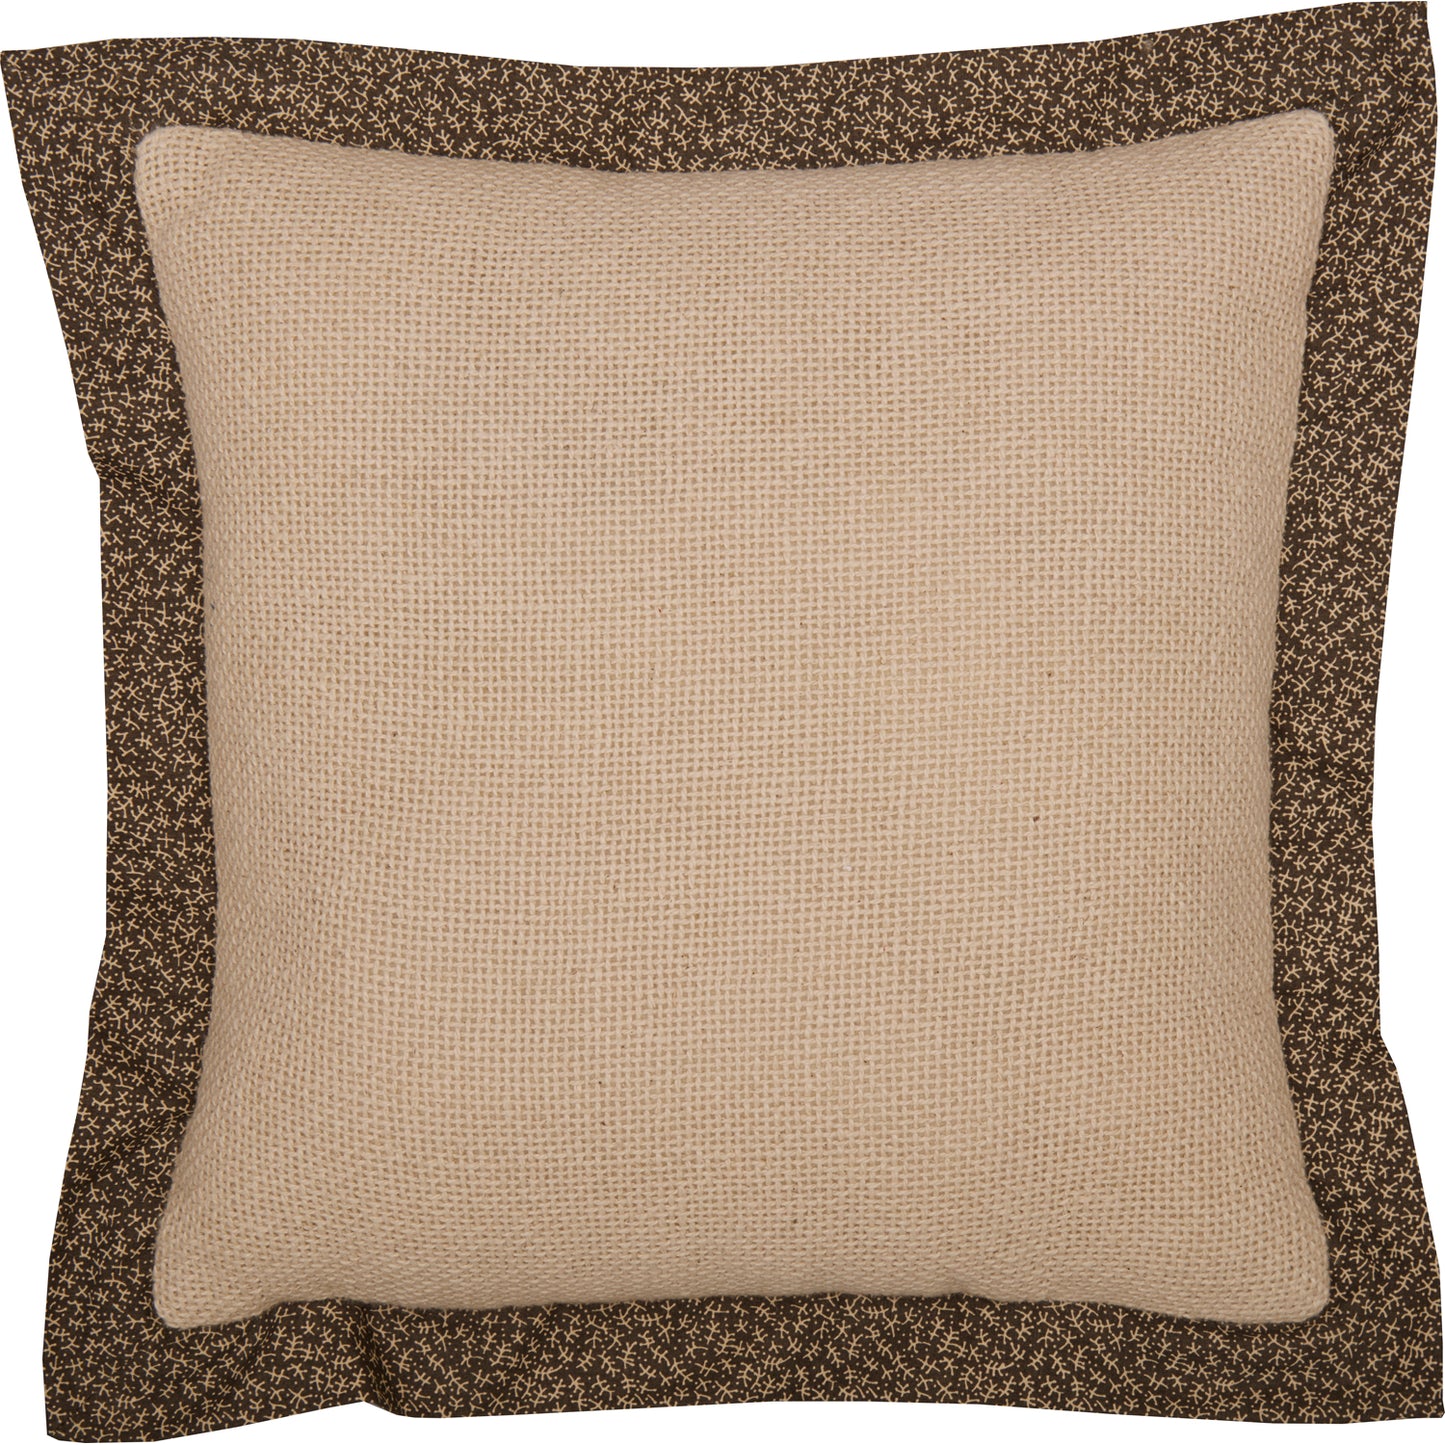 54618-Kettle-Grove-Believe-and-Receive-Pillow-12x12-image-5